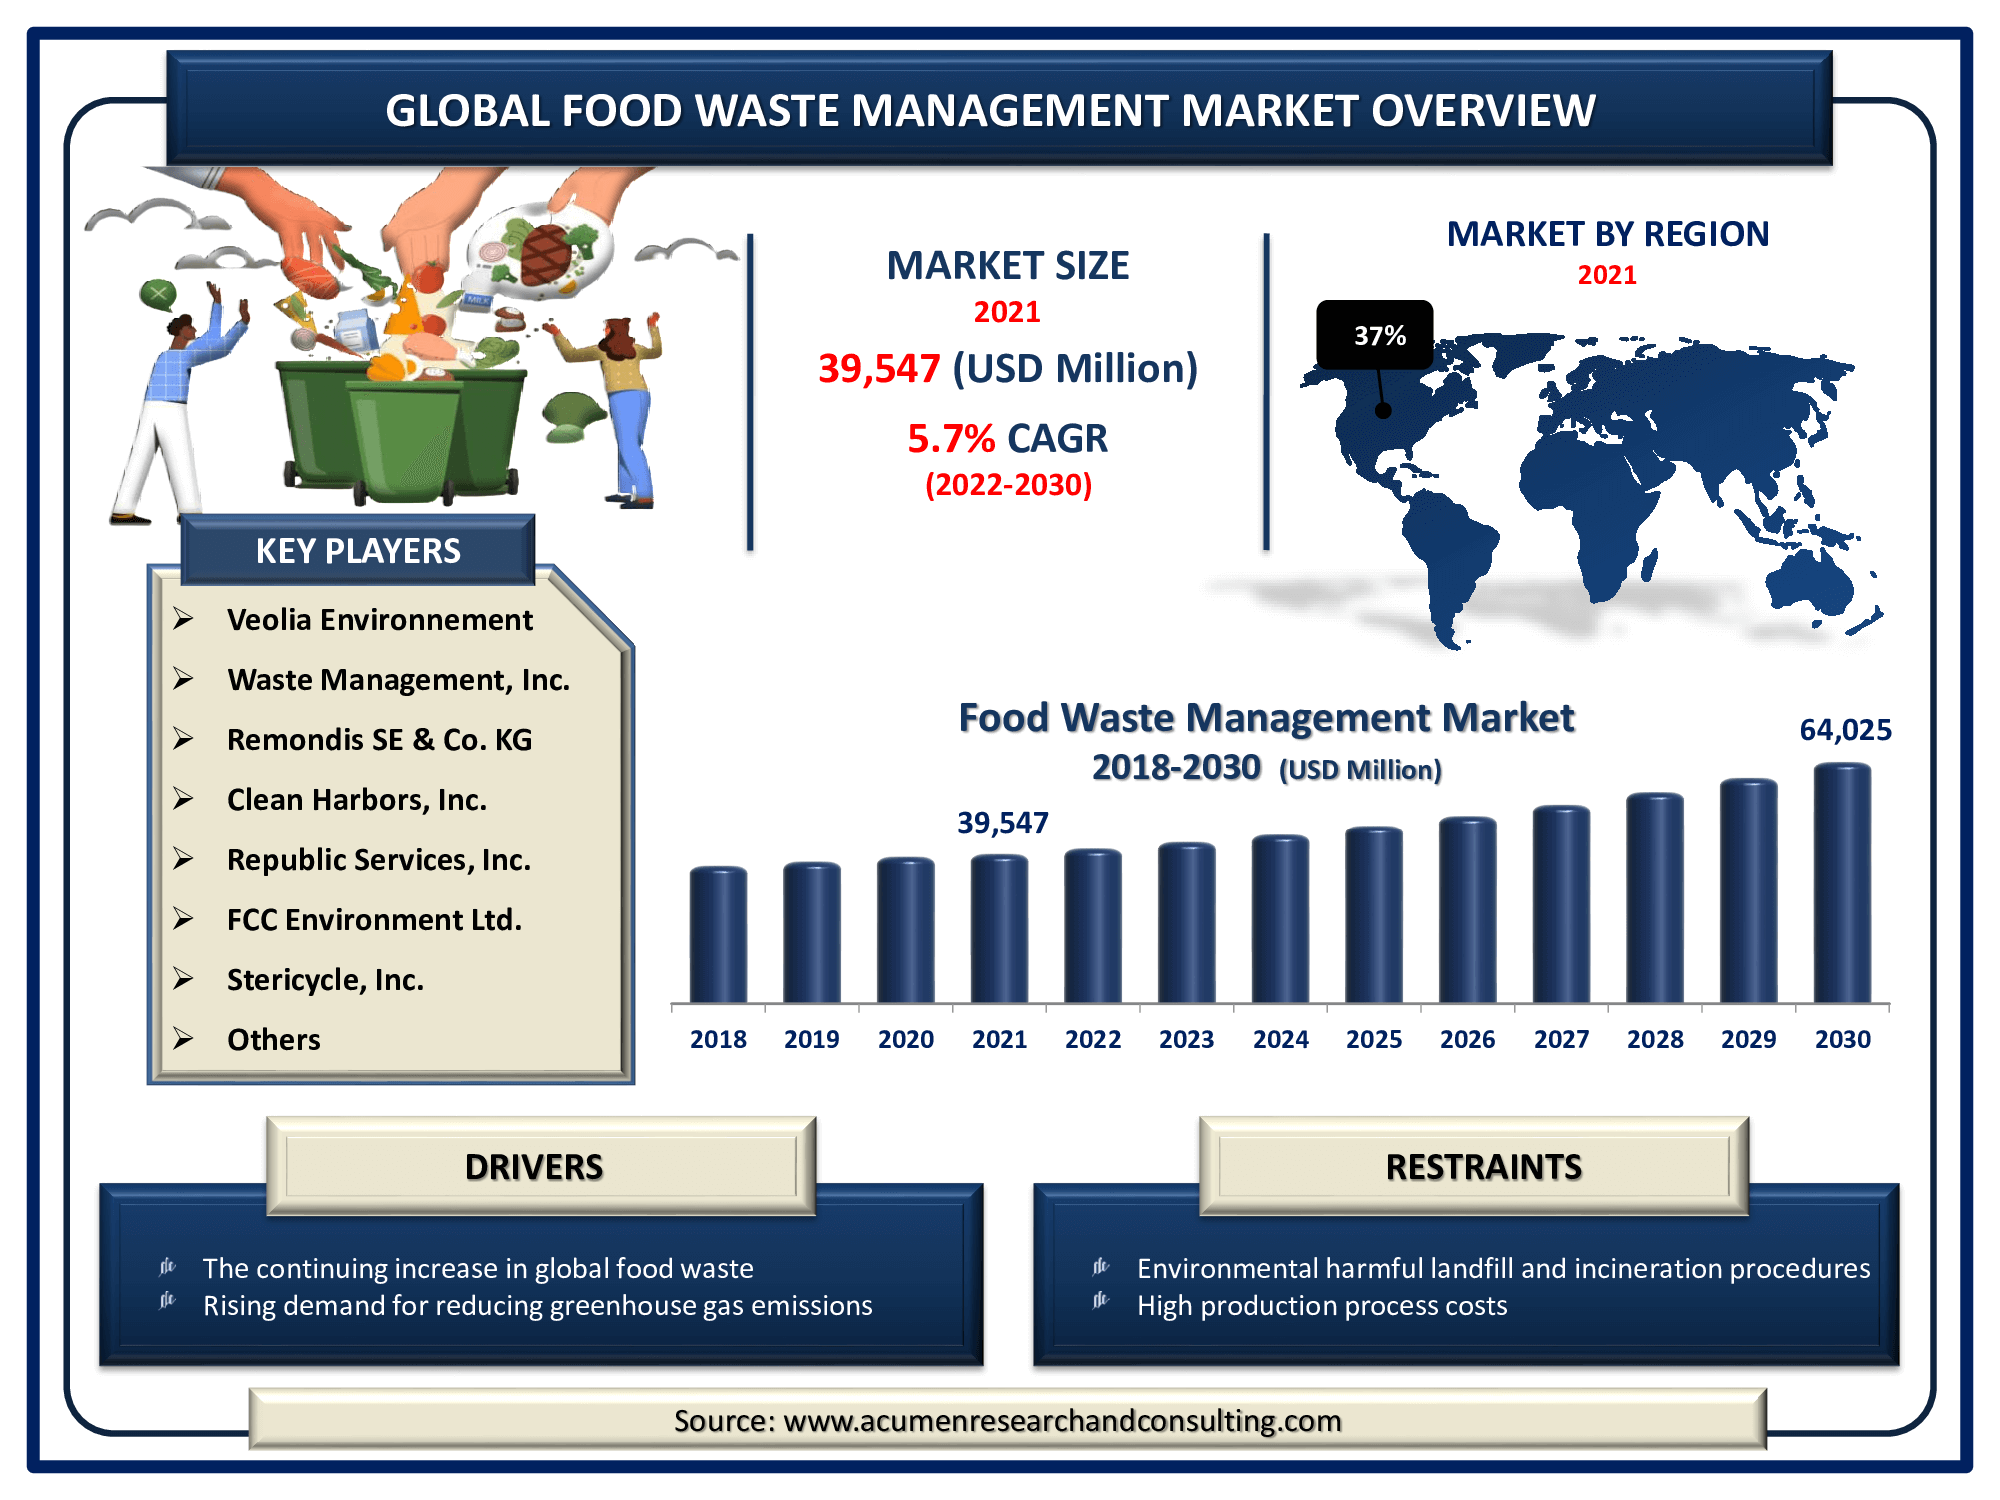 The Global Food Waste Management Market Size accounted for USD 39,547 Million in 2021 and is estimated to achieve a market size of USD 64,025 Million by 2030 growing at a CAGR of 5.7% from 2022 to 2030.